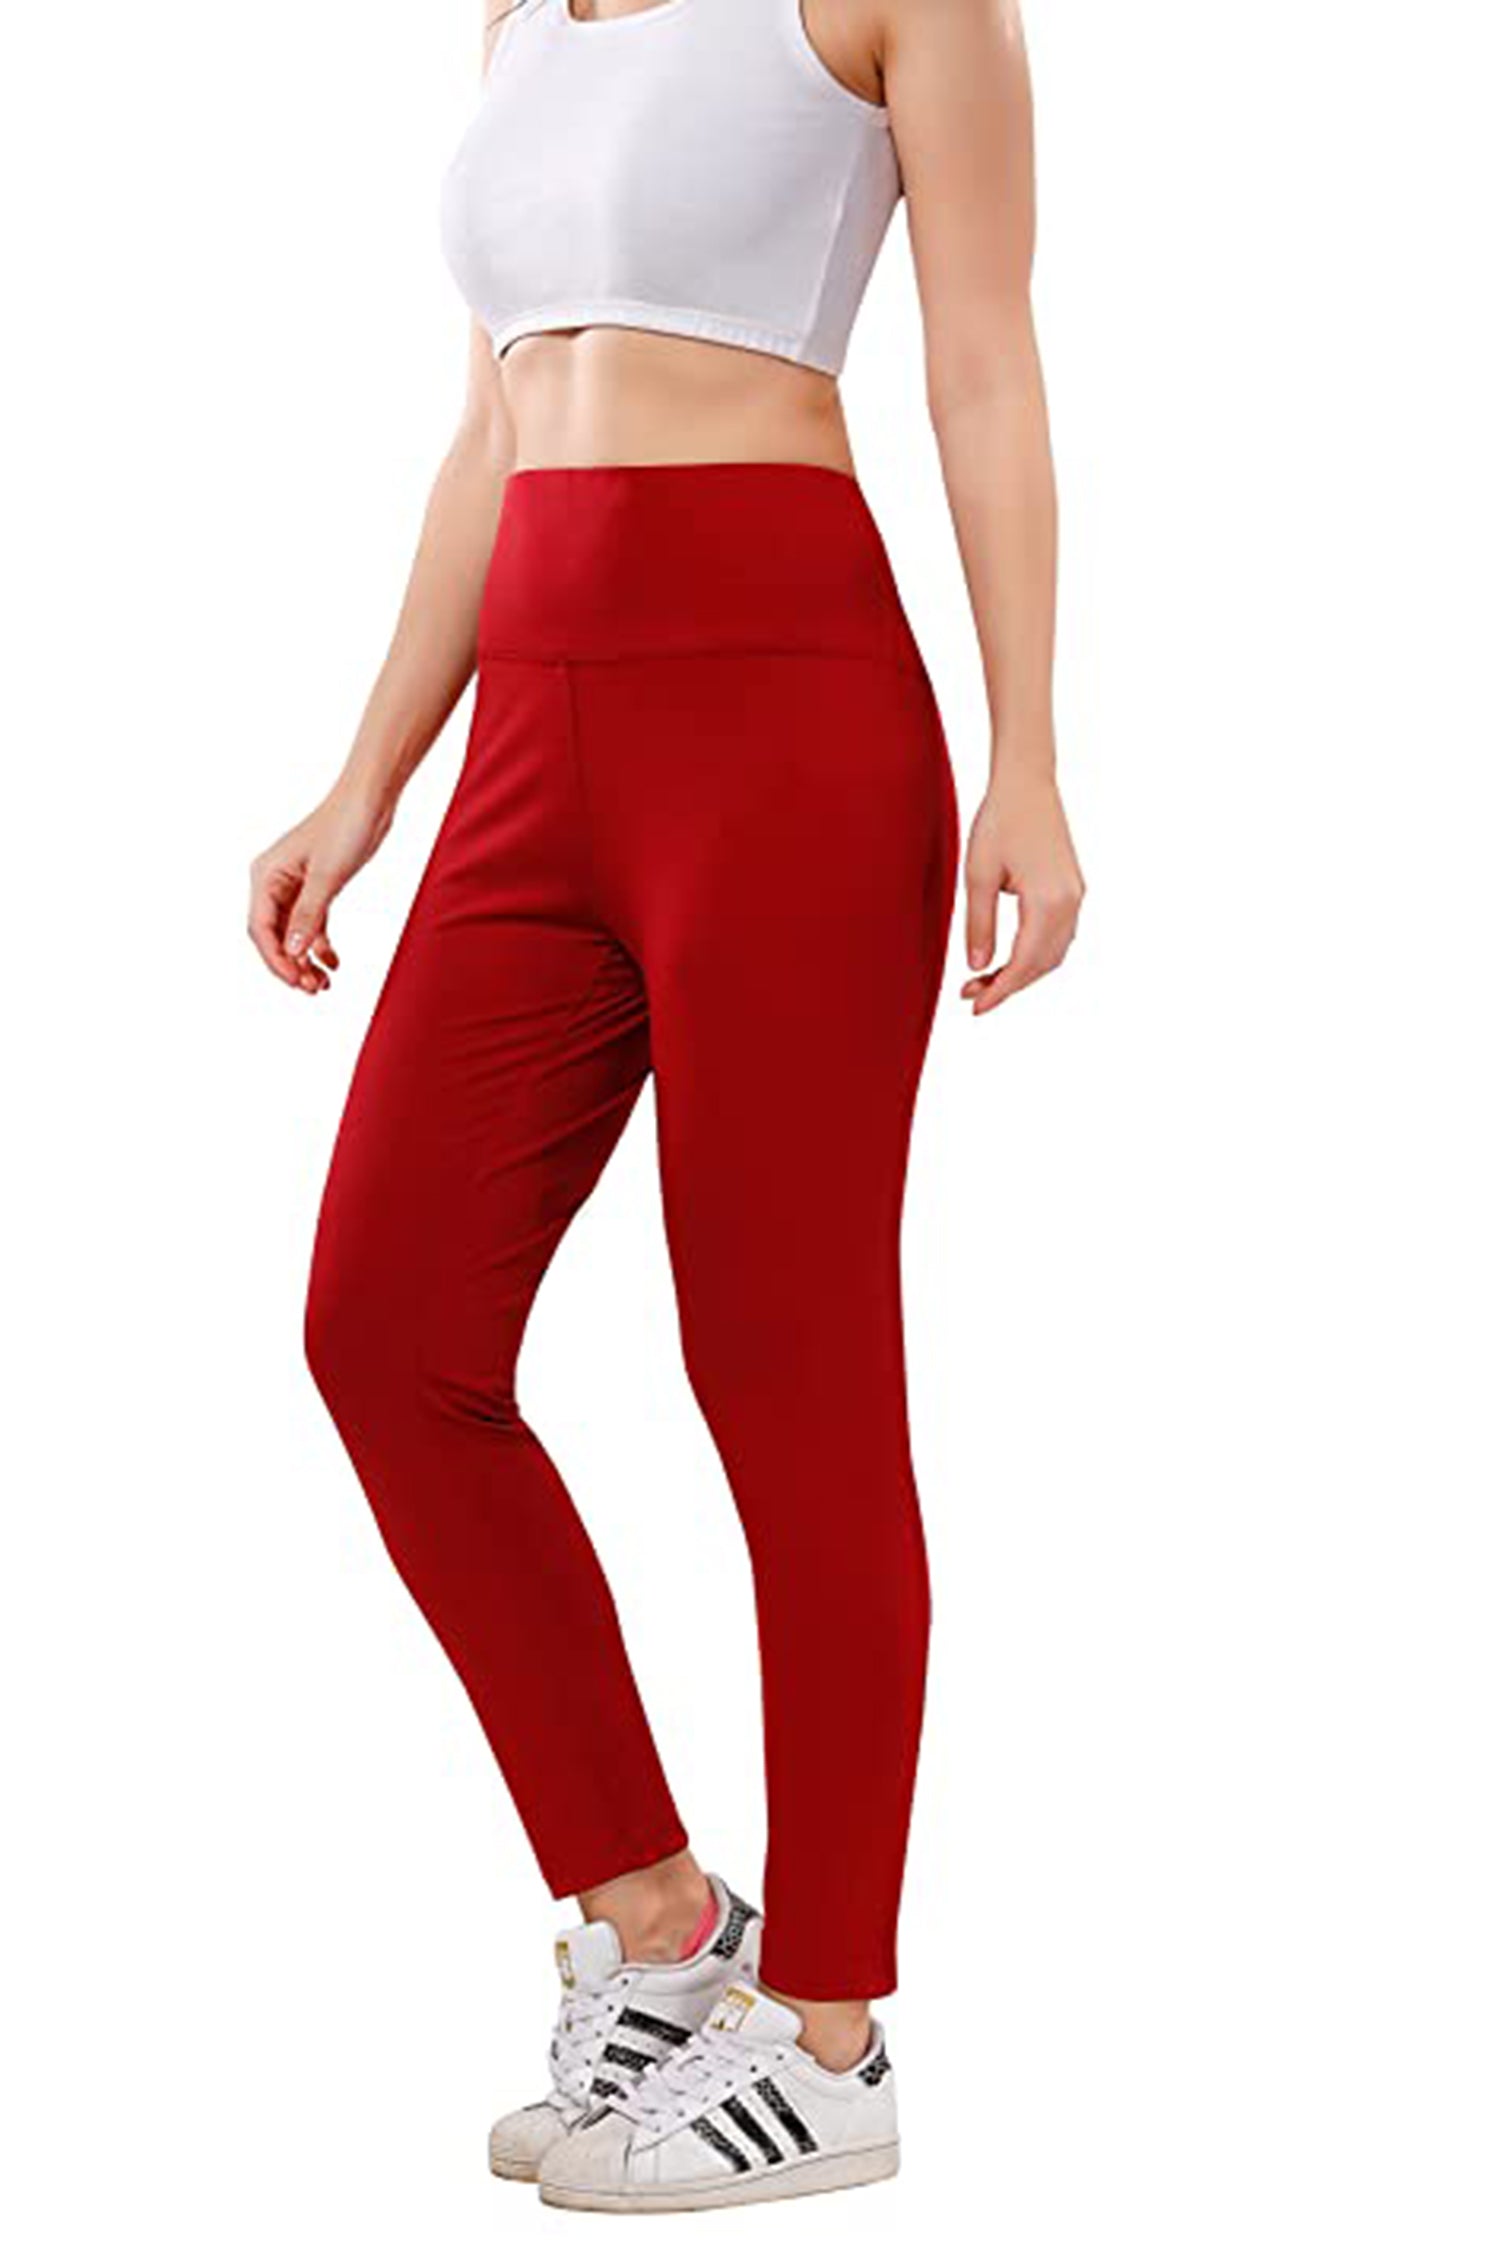 Where to Buy Leggings When You Have a Big Butt - Racked